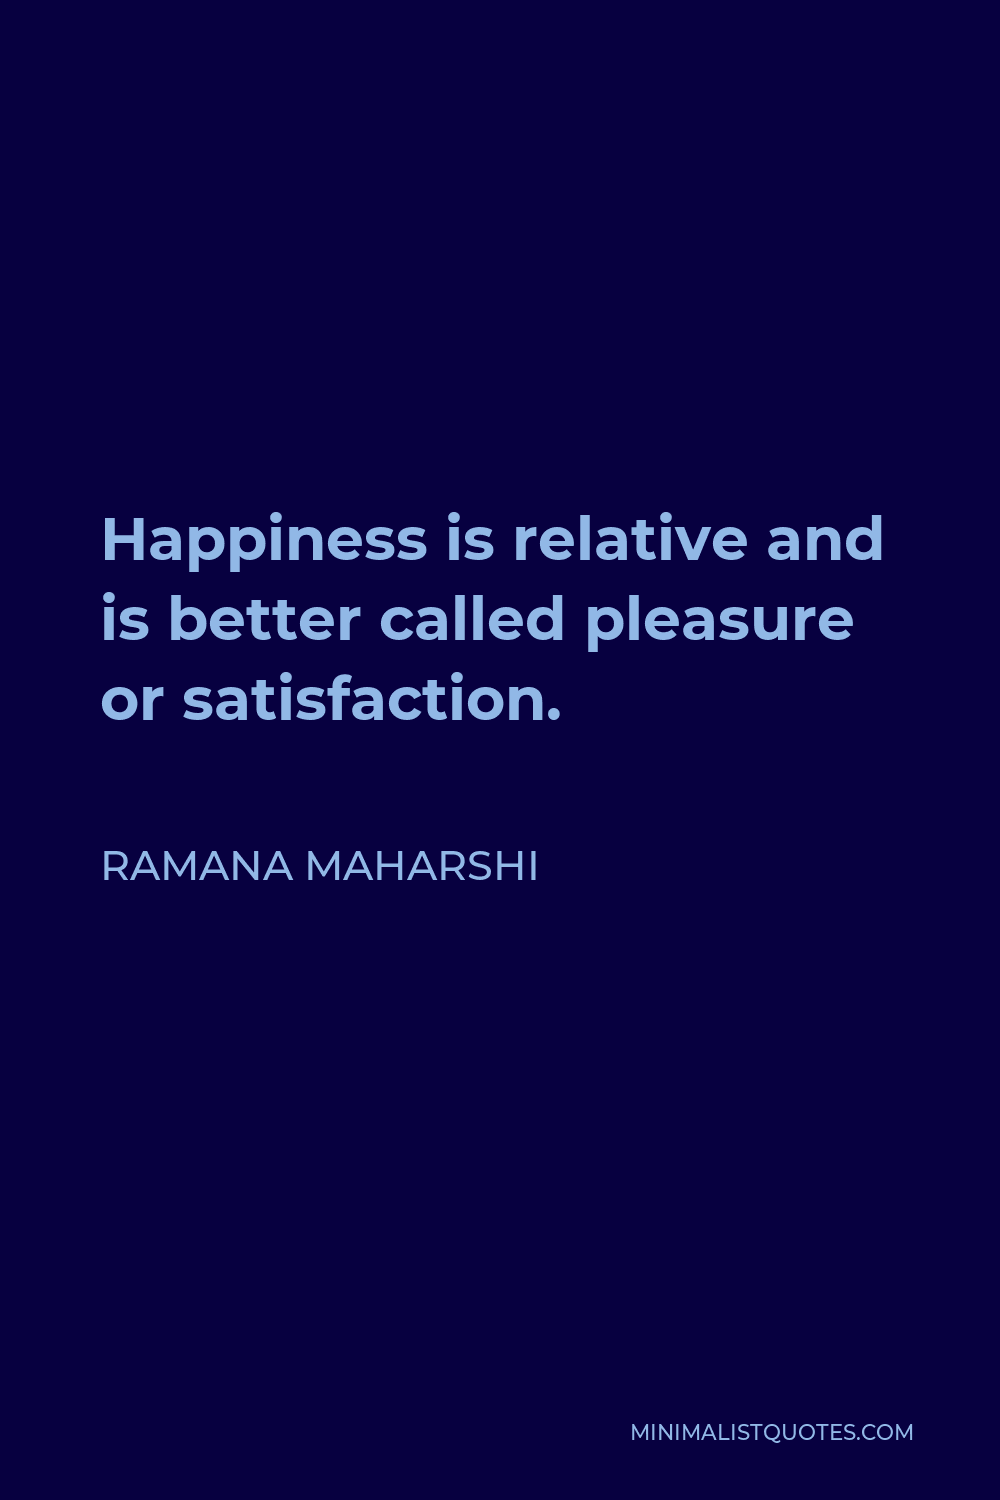 Ramana Maharshi Quote - Happiness is relative and is better called pleasure or satisfaction.